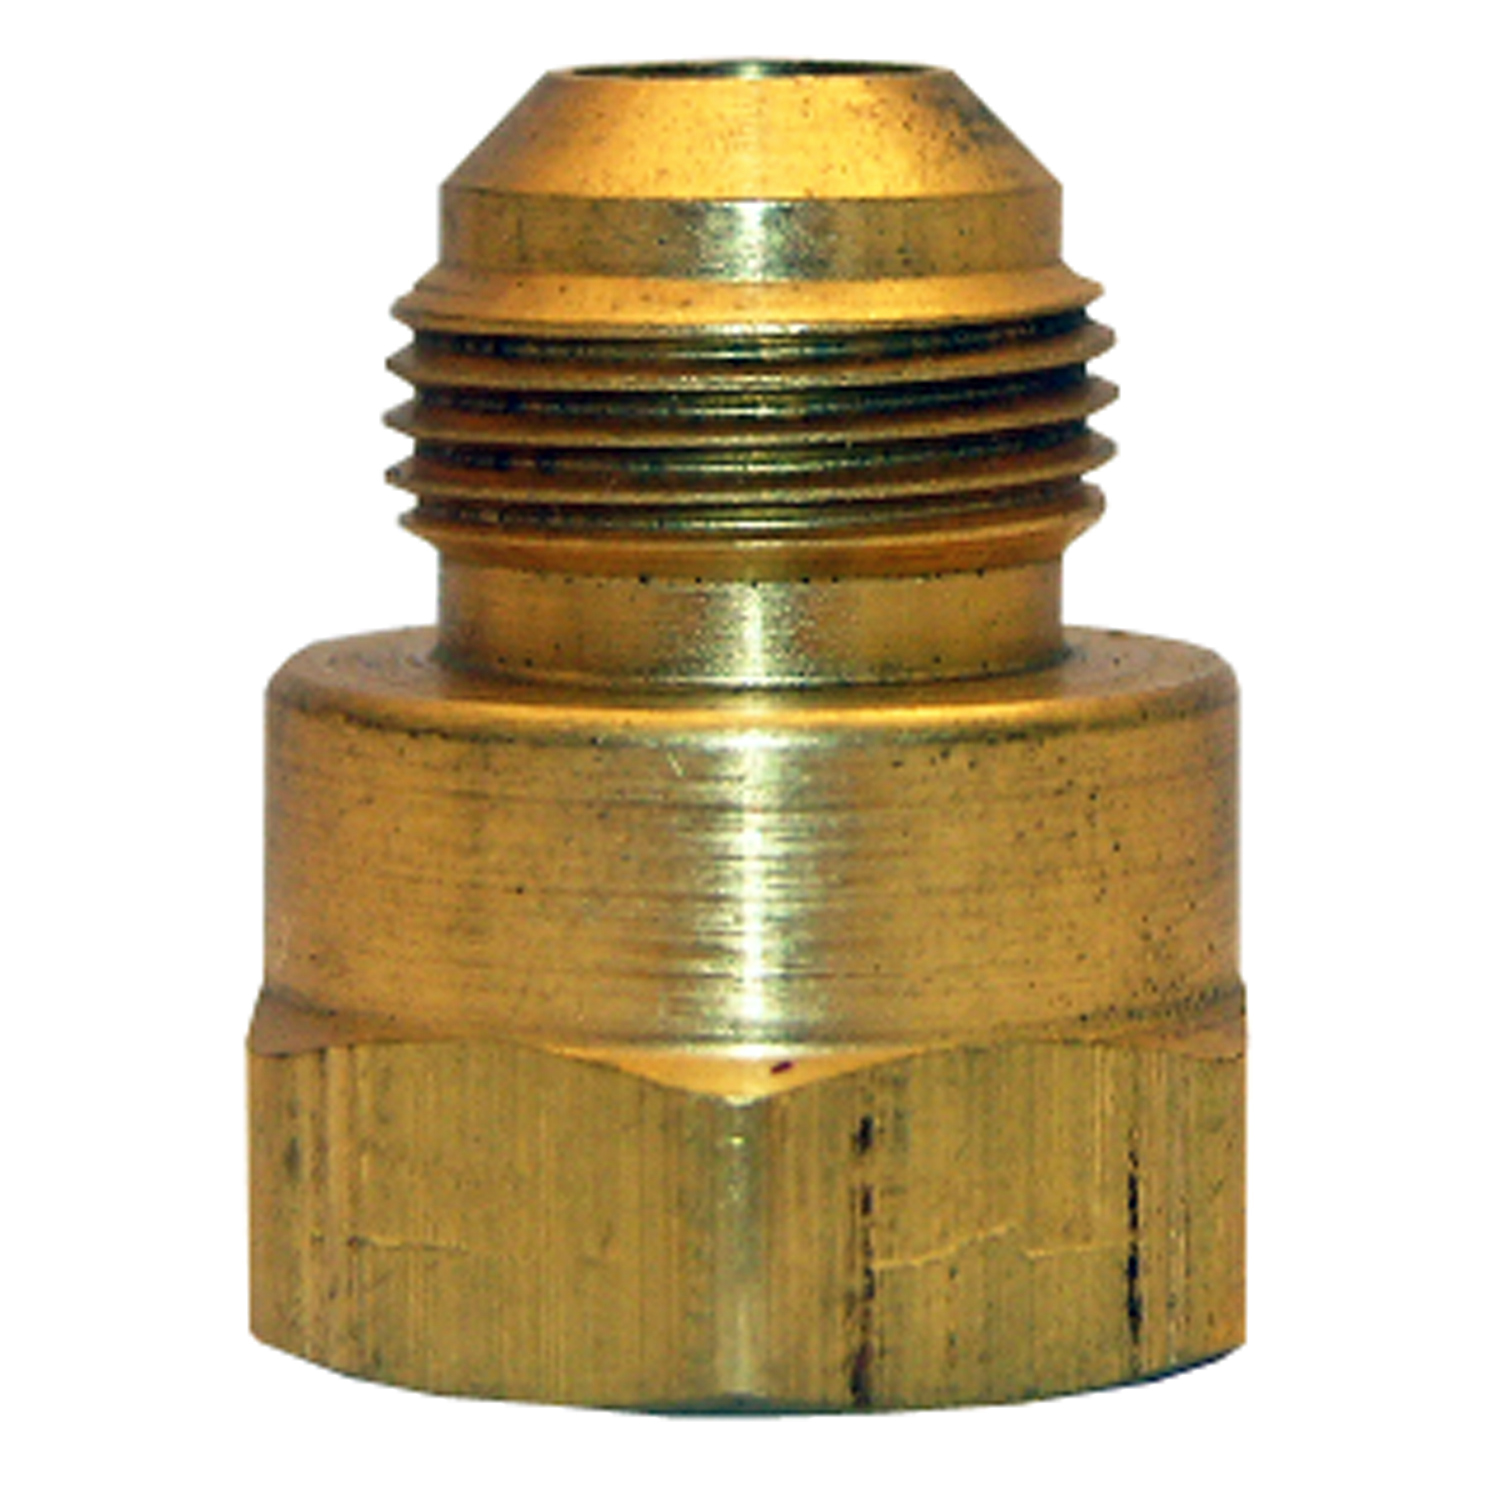 17-4671 Pipe Adapter, 3/8 in, Male Flare x FPT, Brass, 900 psi Pressure